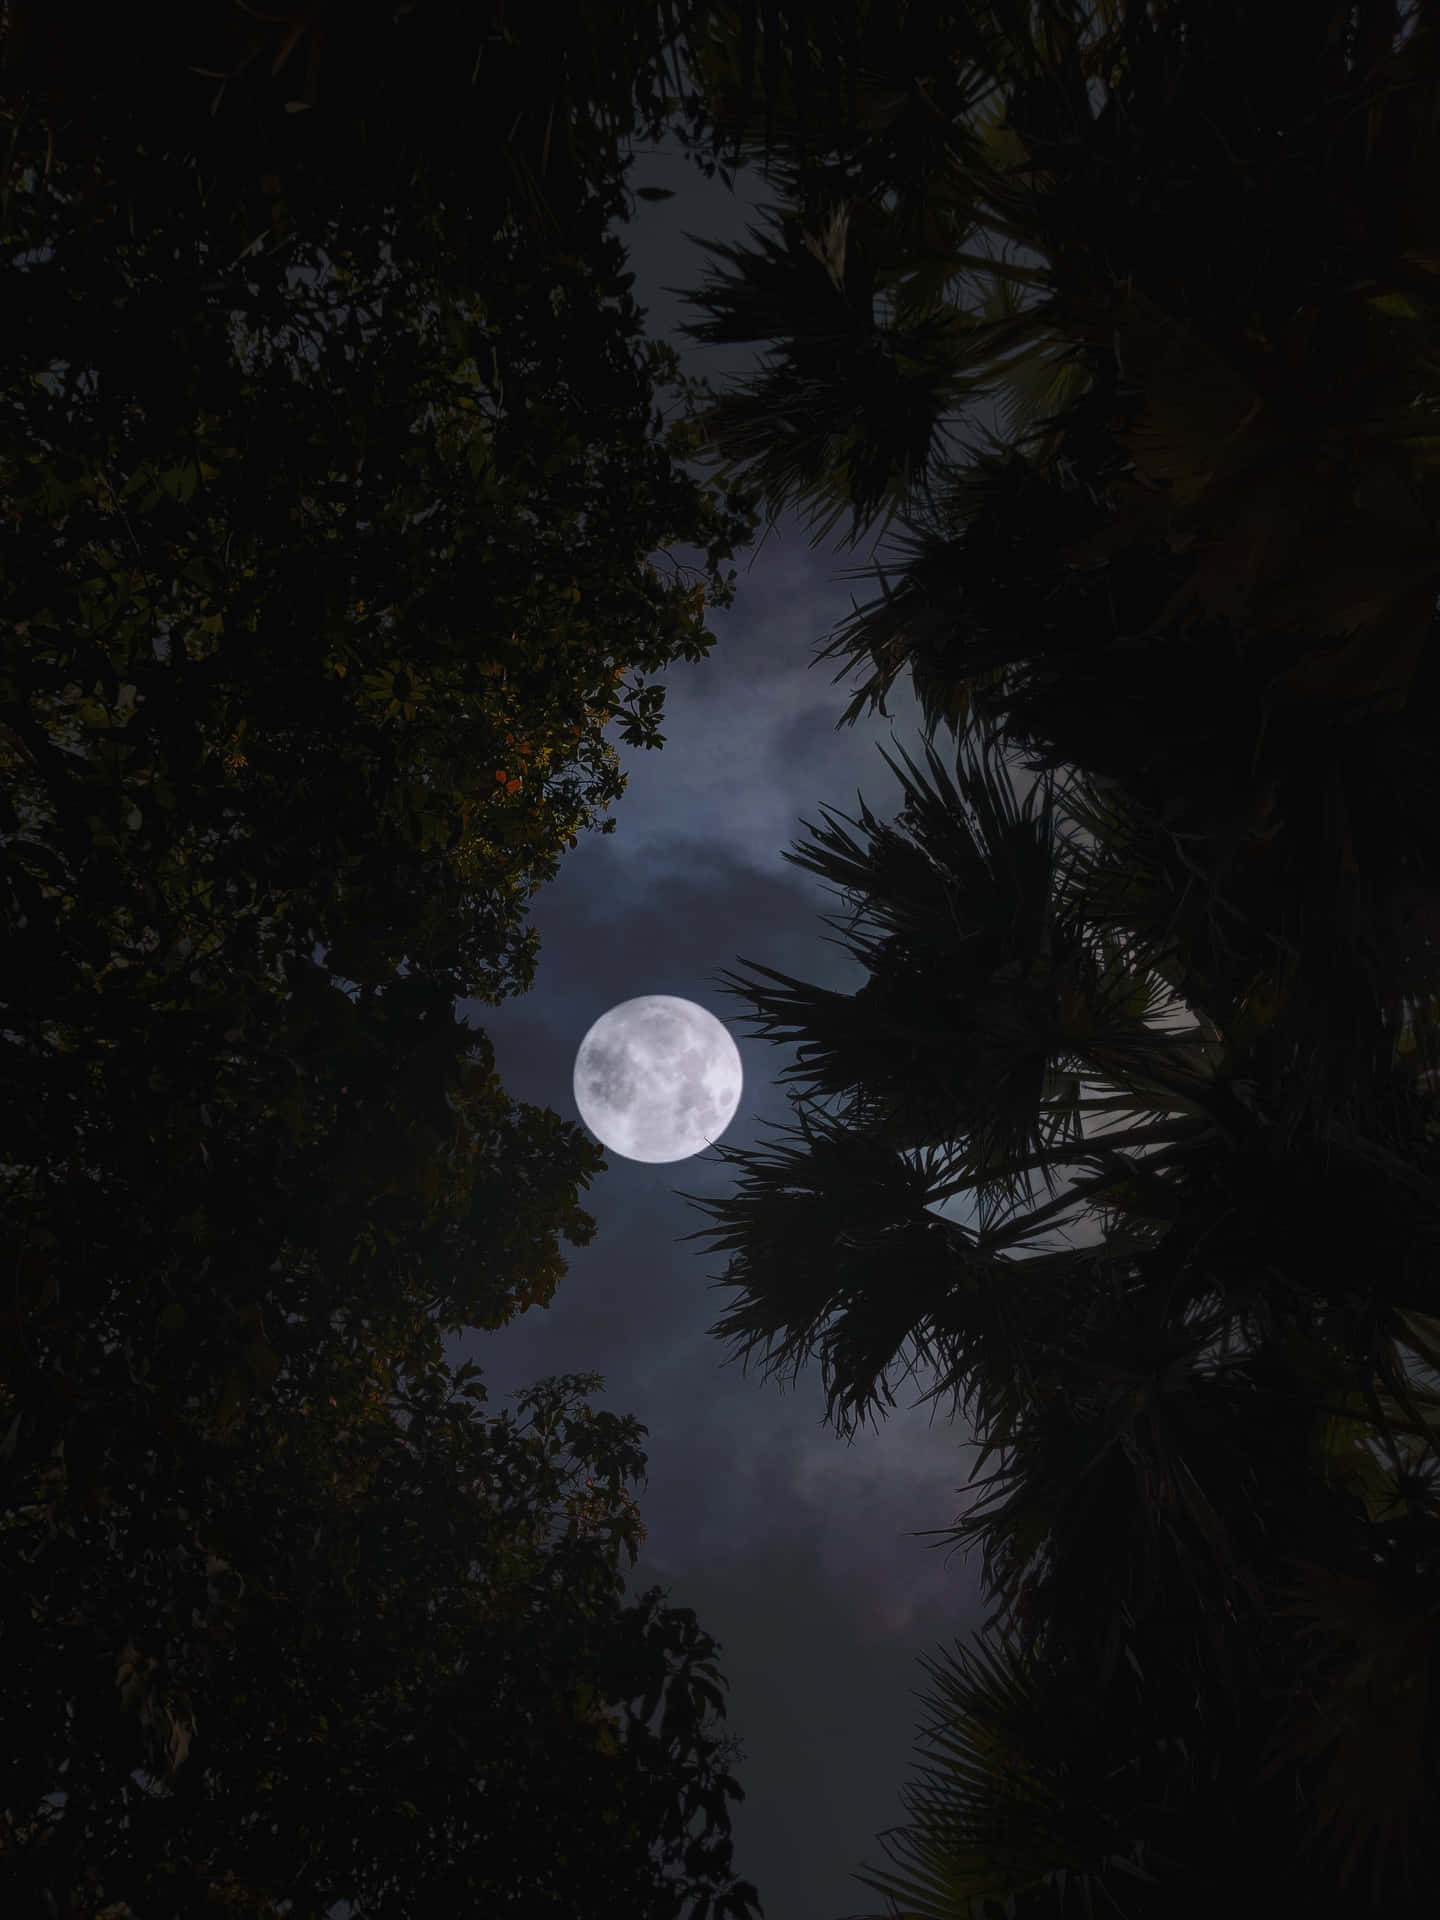 A lovely full moon lighting up a peaceful night sky. Wallpaper